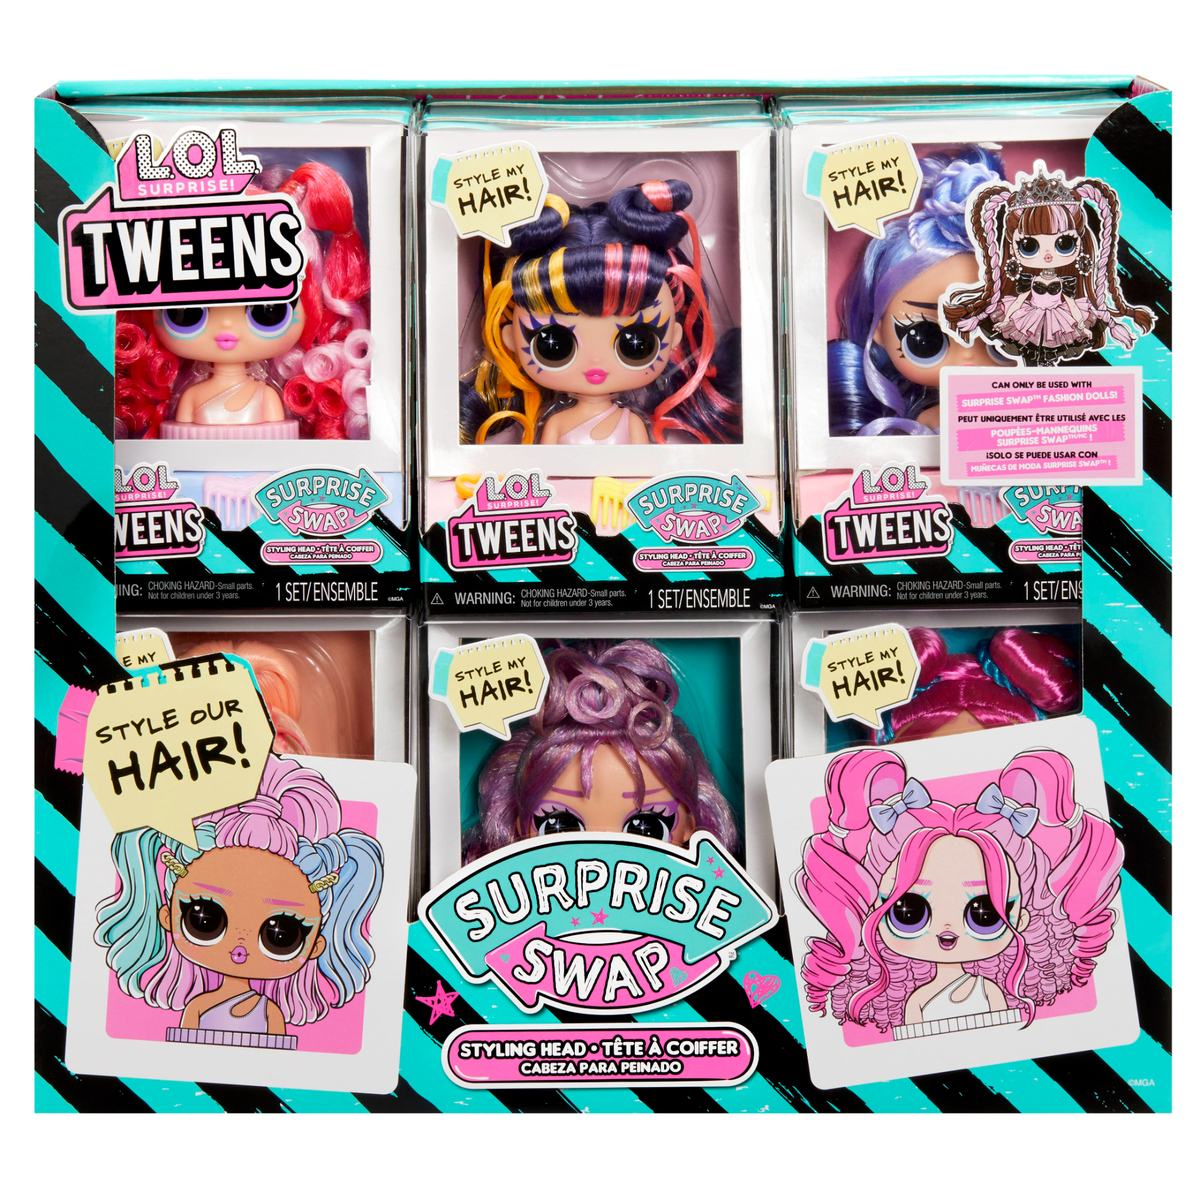 L.O.L. Surprise Tweens Surprise Swap Styling Head, Assorted, MGA-593522